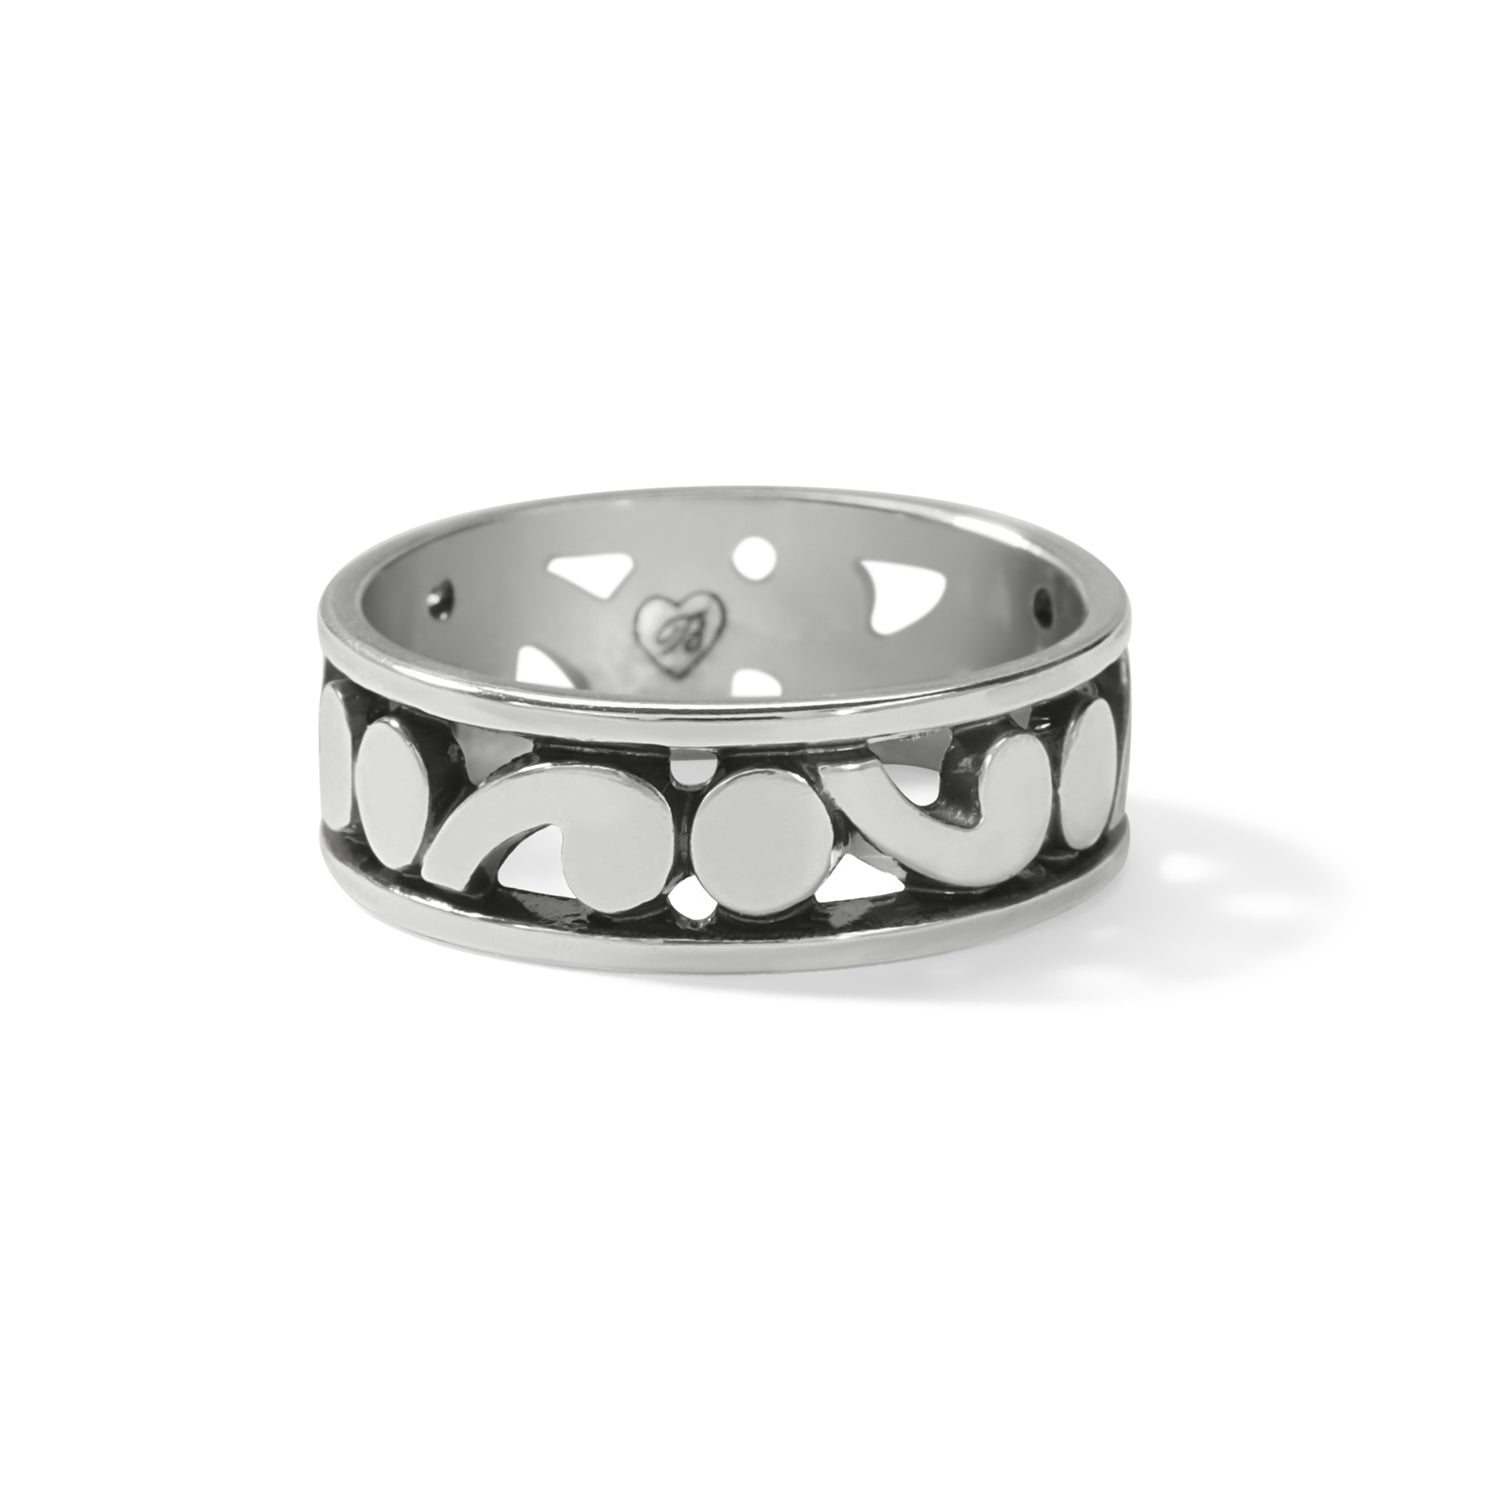 Contempo Band Ring - Size 7 Front View